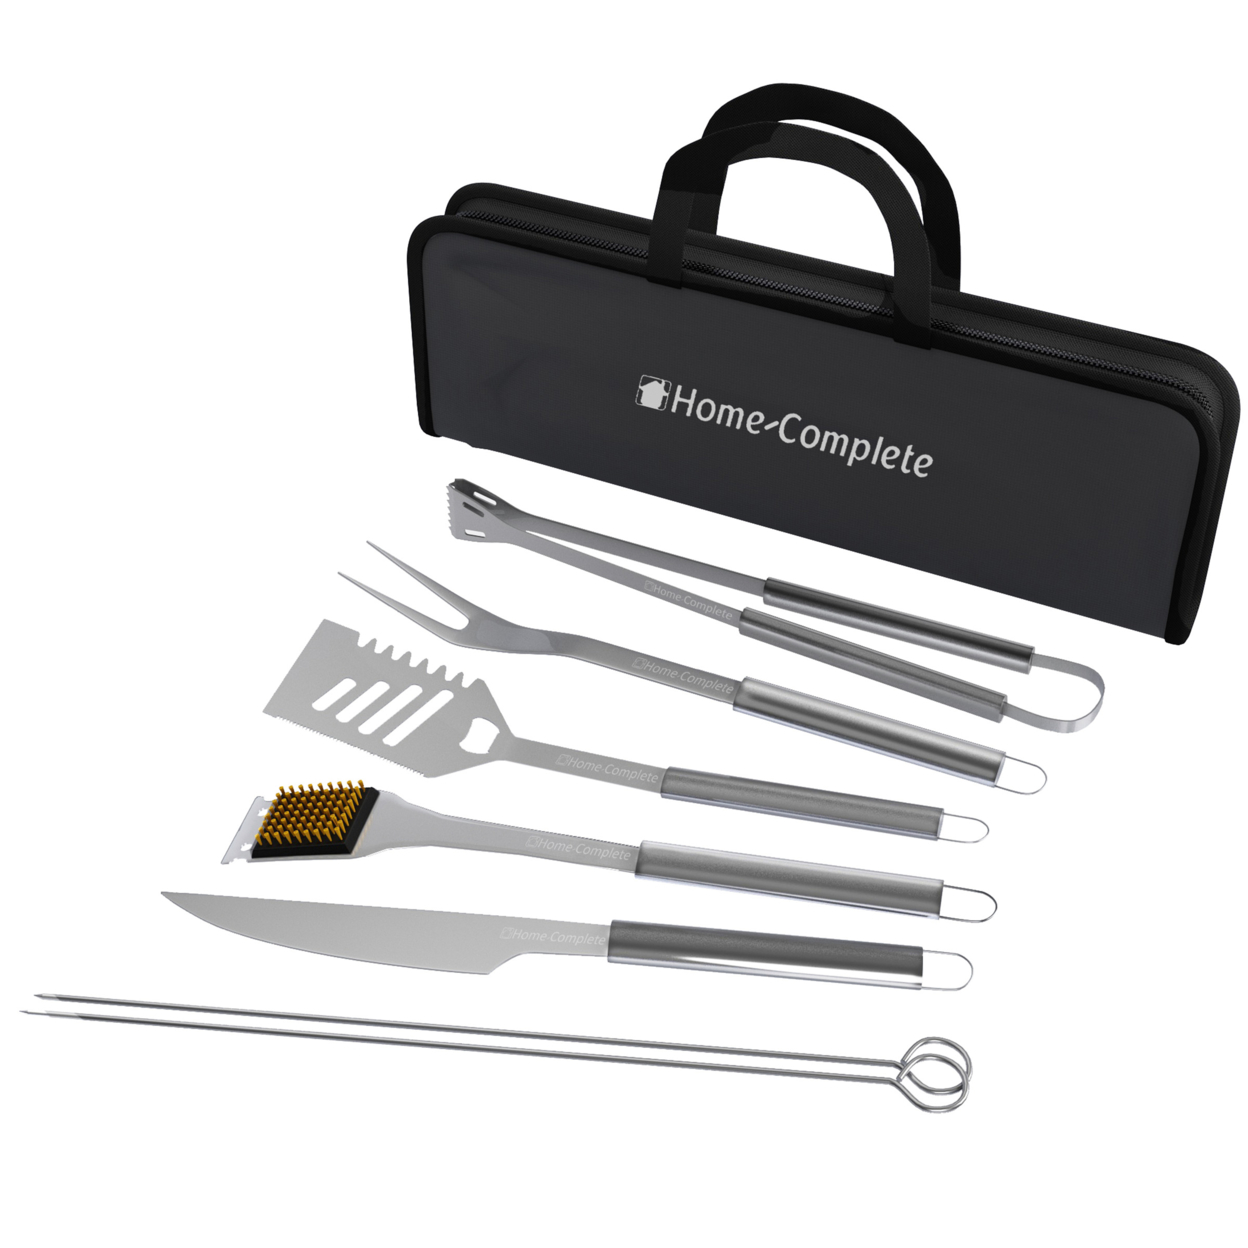 BBQ Grill Tool Set- Stainless Steel Barbecue Grilling Accessories With 7 Utensils And Carrying Case